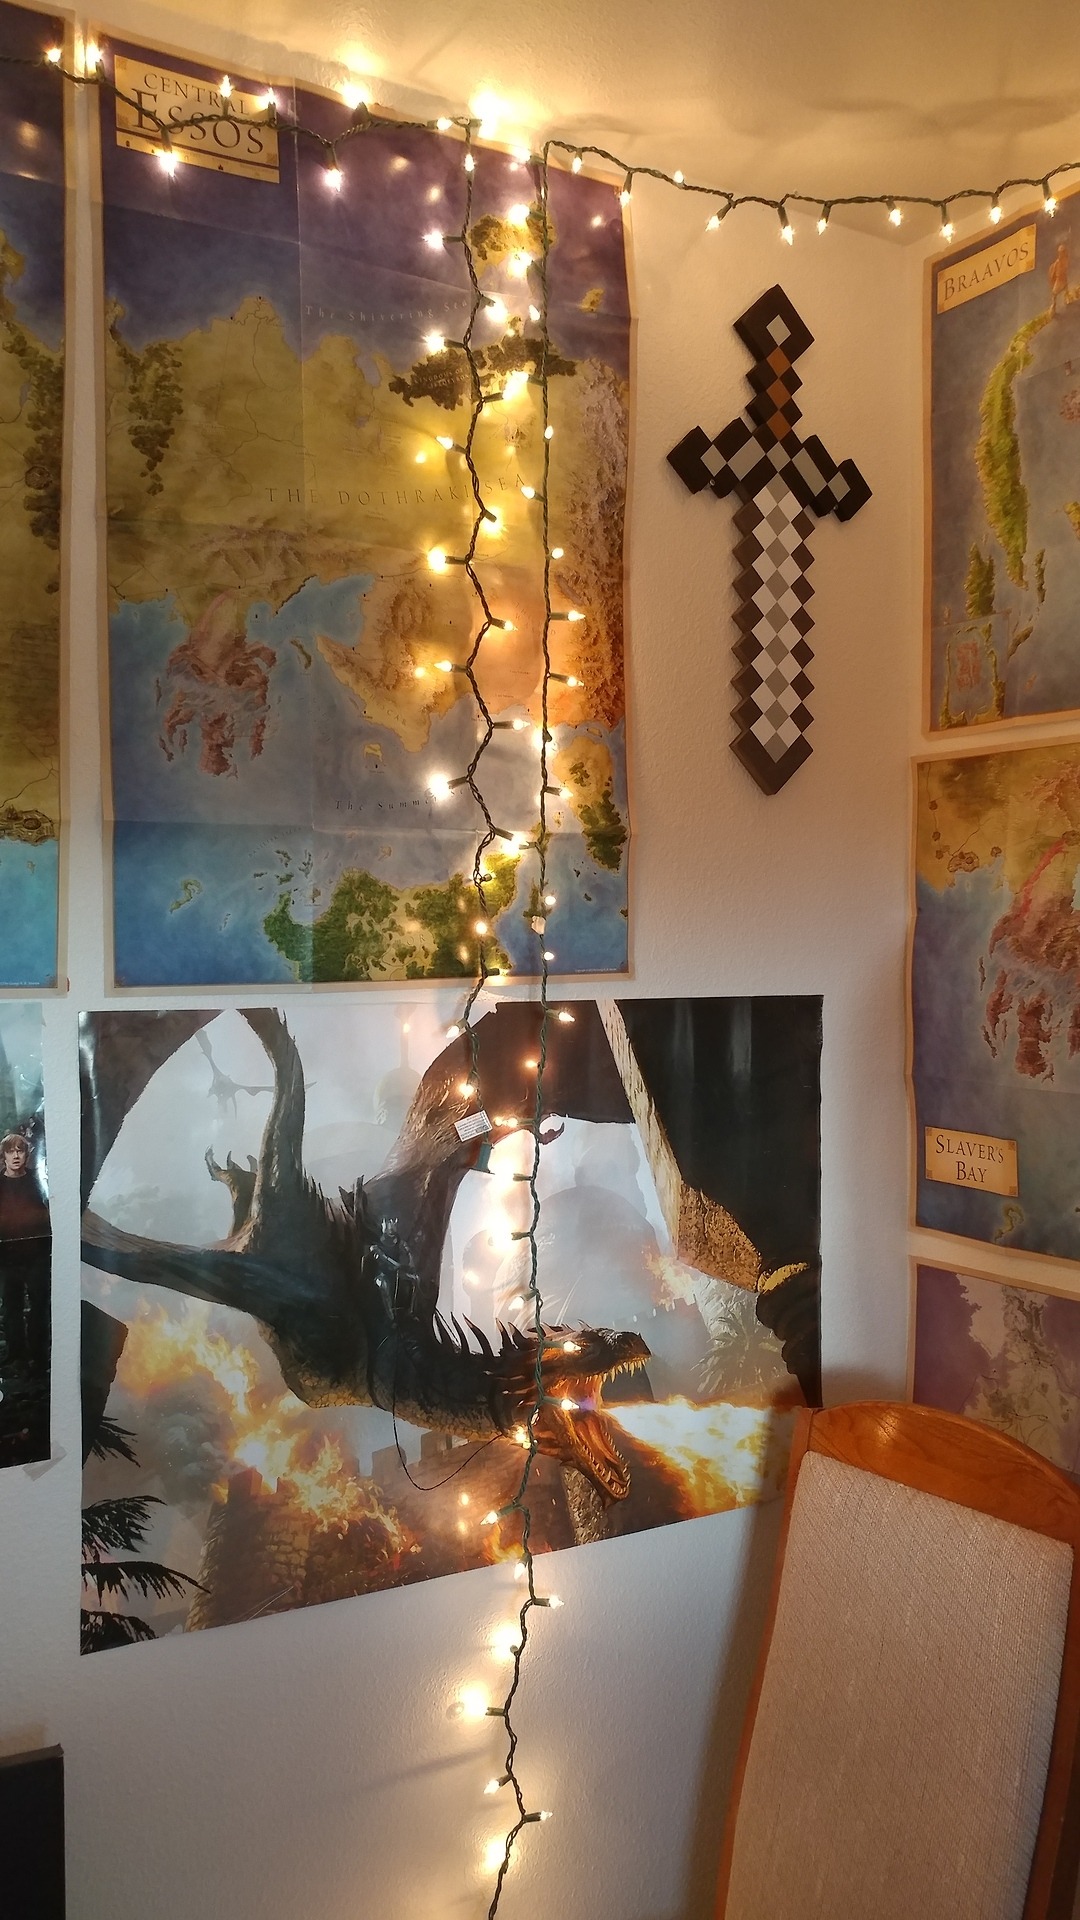 Updated pictures of my nerd room. I hung up my Minecraft sword next to my maps of